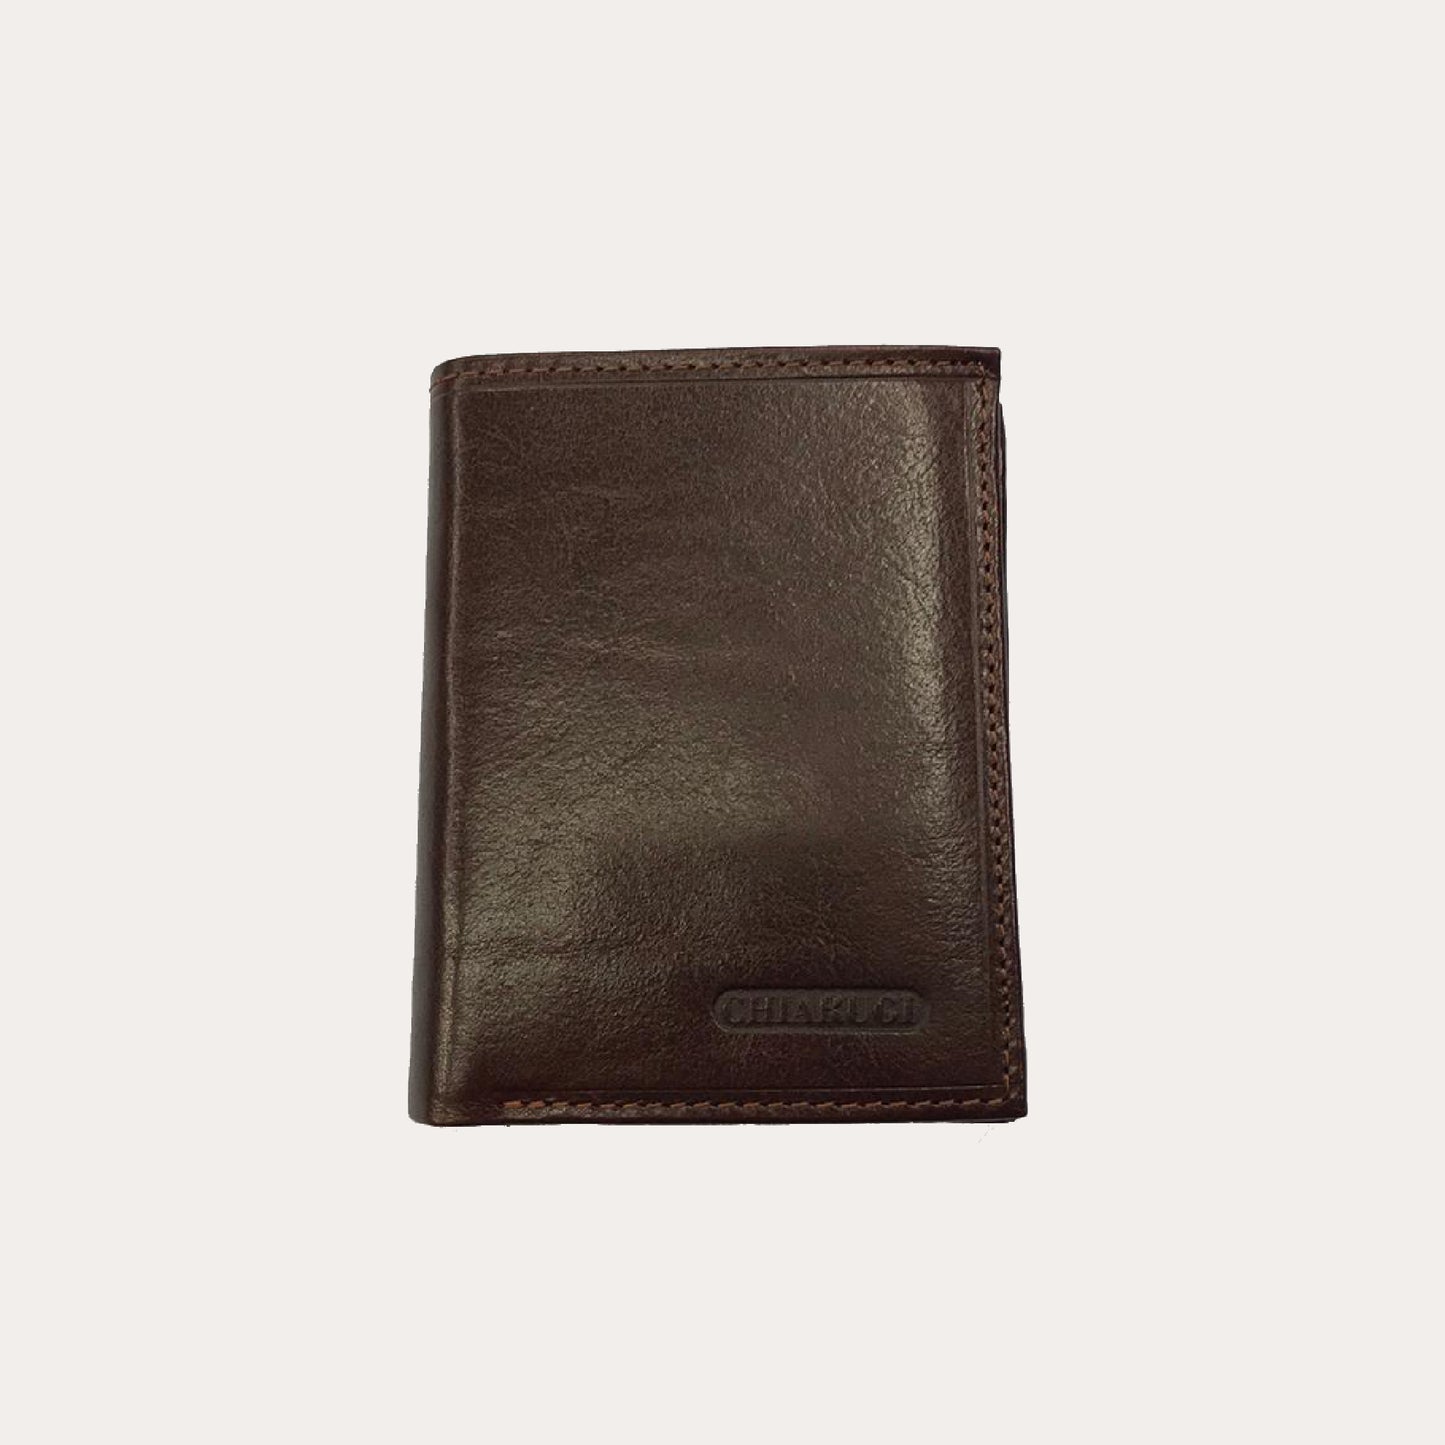 Chiarugi Maroon Leather Wallet-6 Credit Card/Coin Section